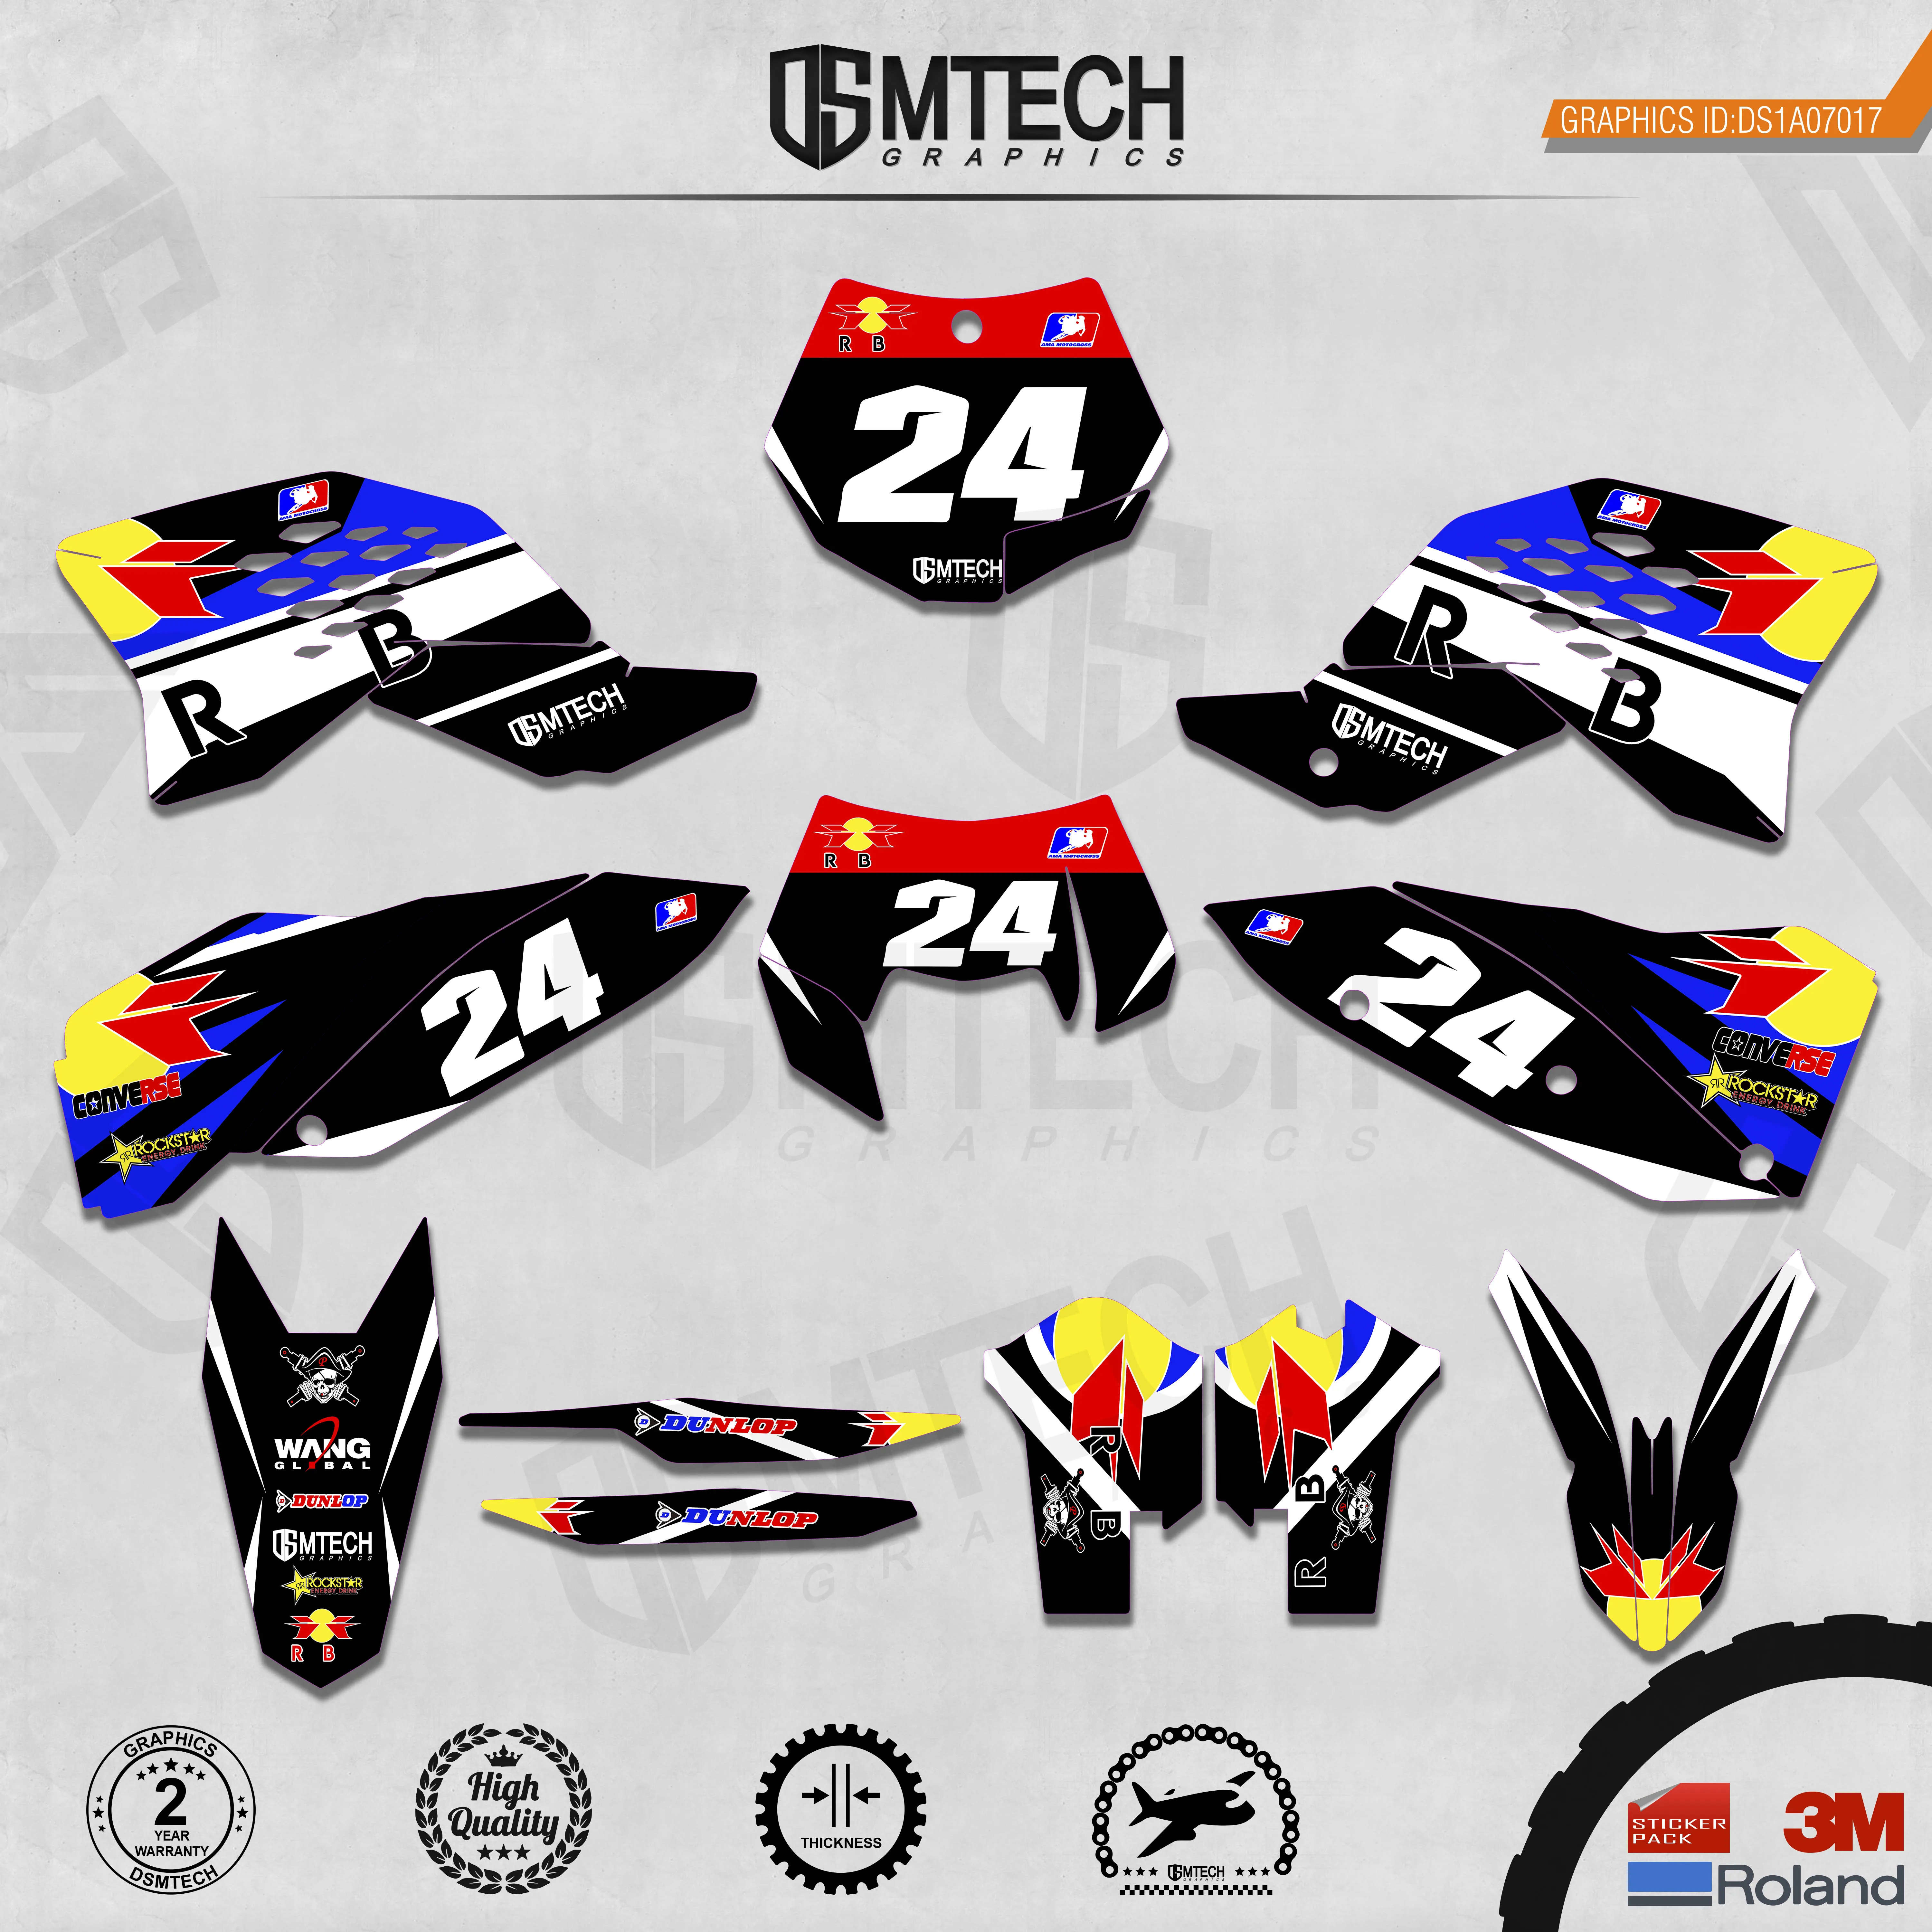 DSMTECH Customized Team Graphics Backgrounds Decals 3M Custom Stickers For 2007-2010 SXF   2008-2011 EXC  017